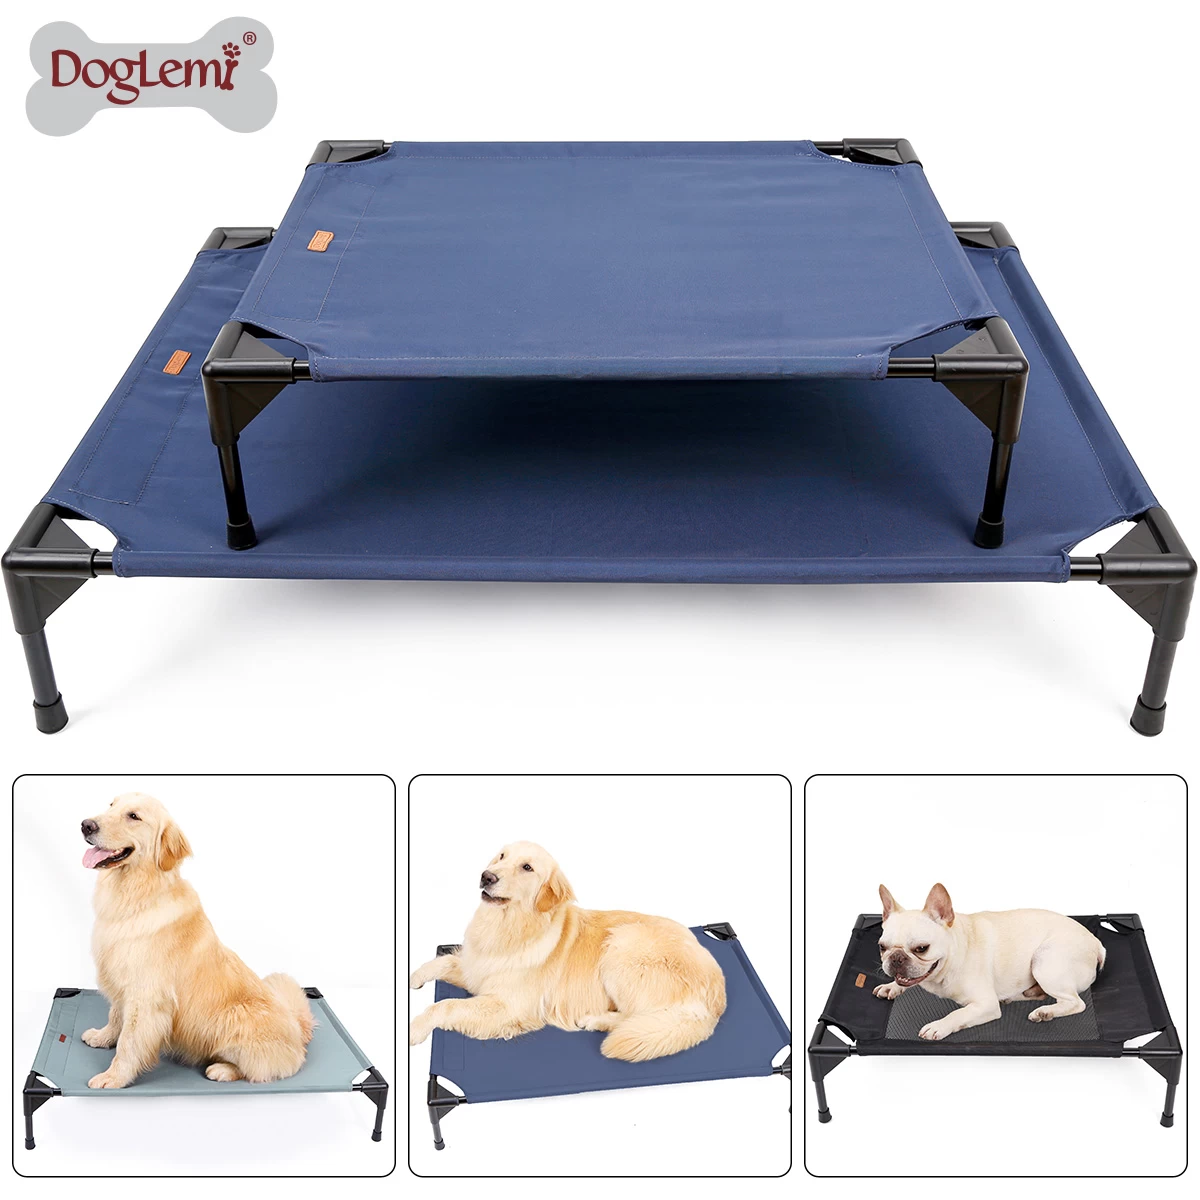 Collapsible pet camp bed